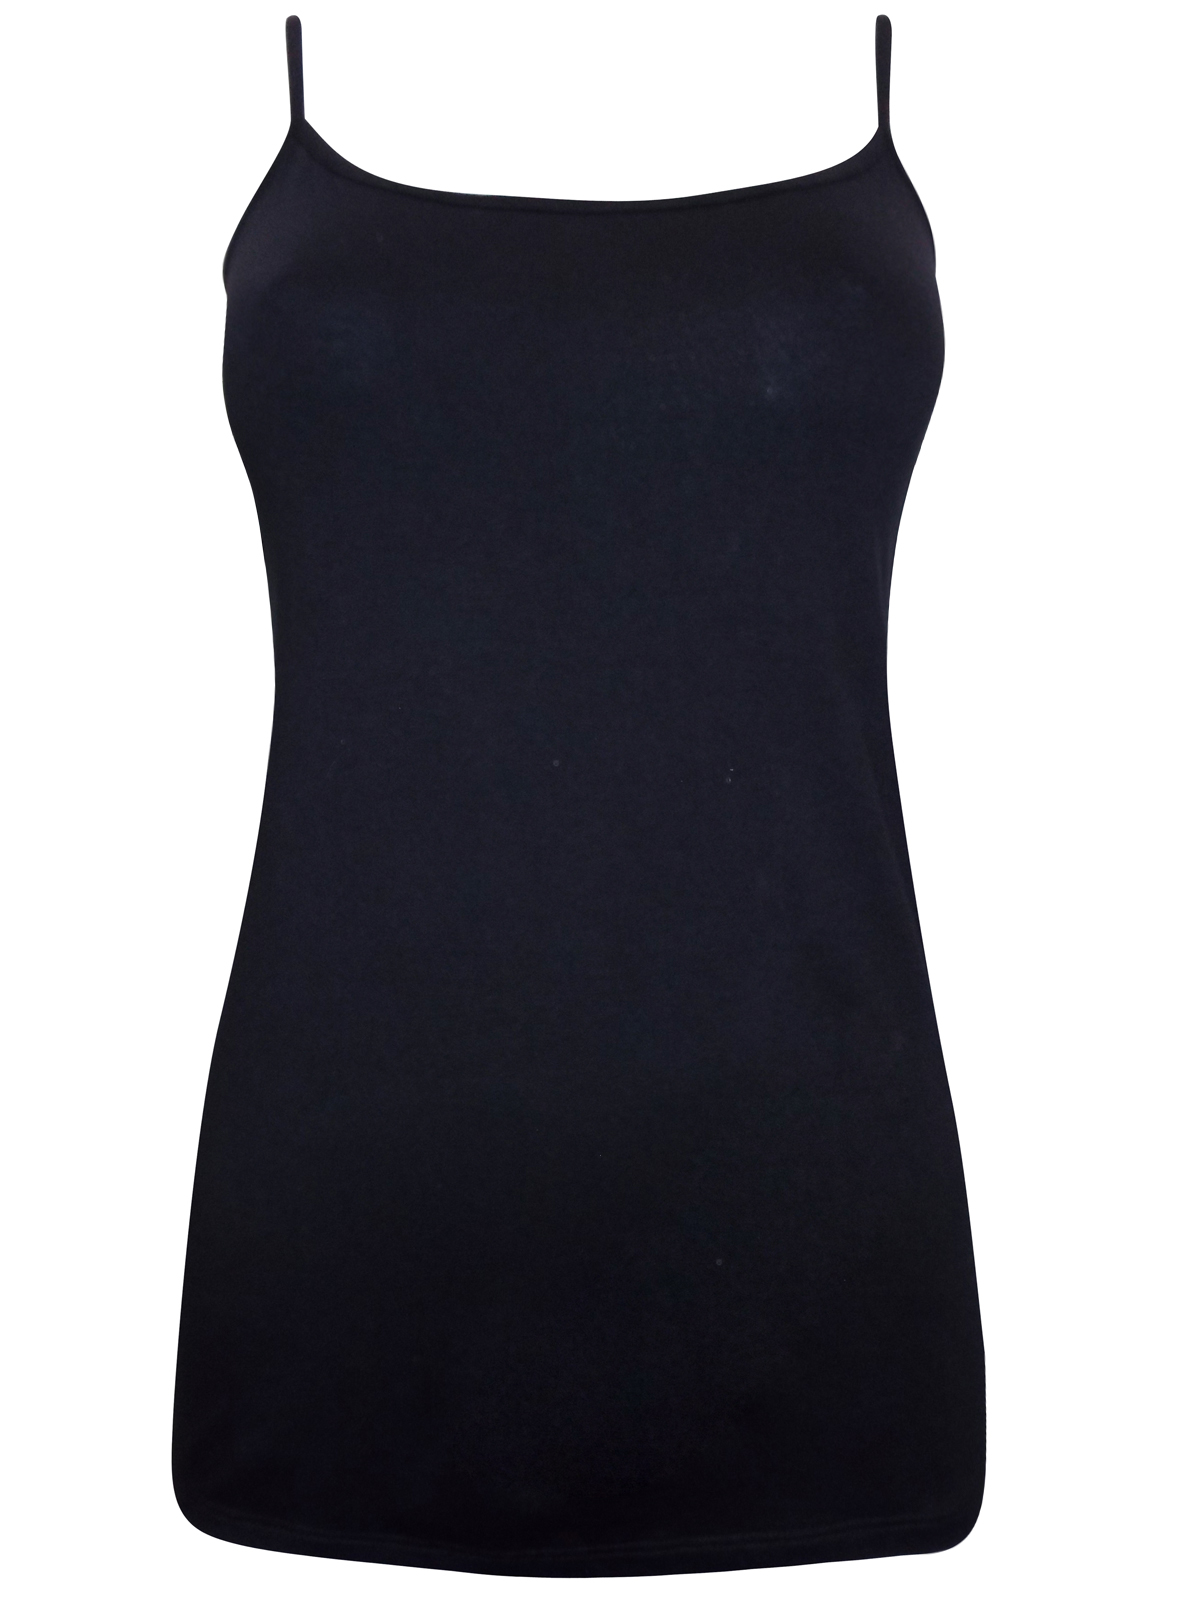 First Avenue BLACK Strappy Jersey Cami Vest - Size 10 to 20